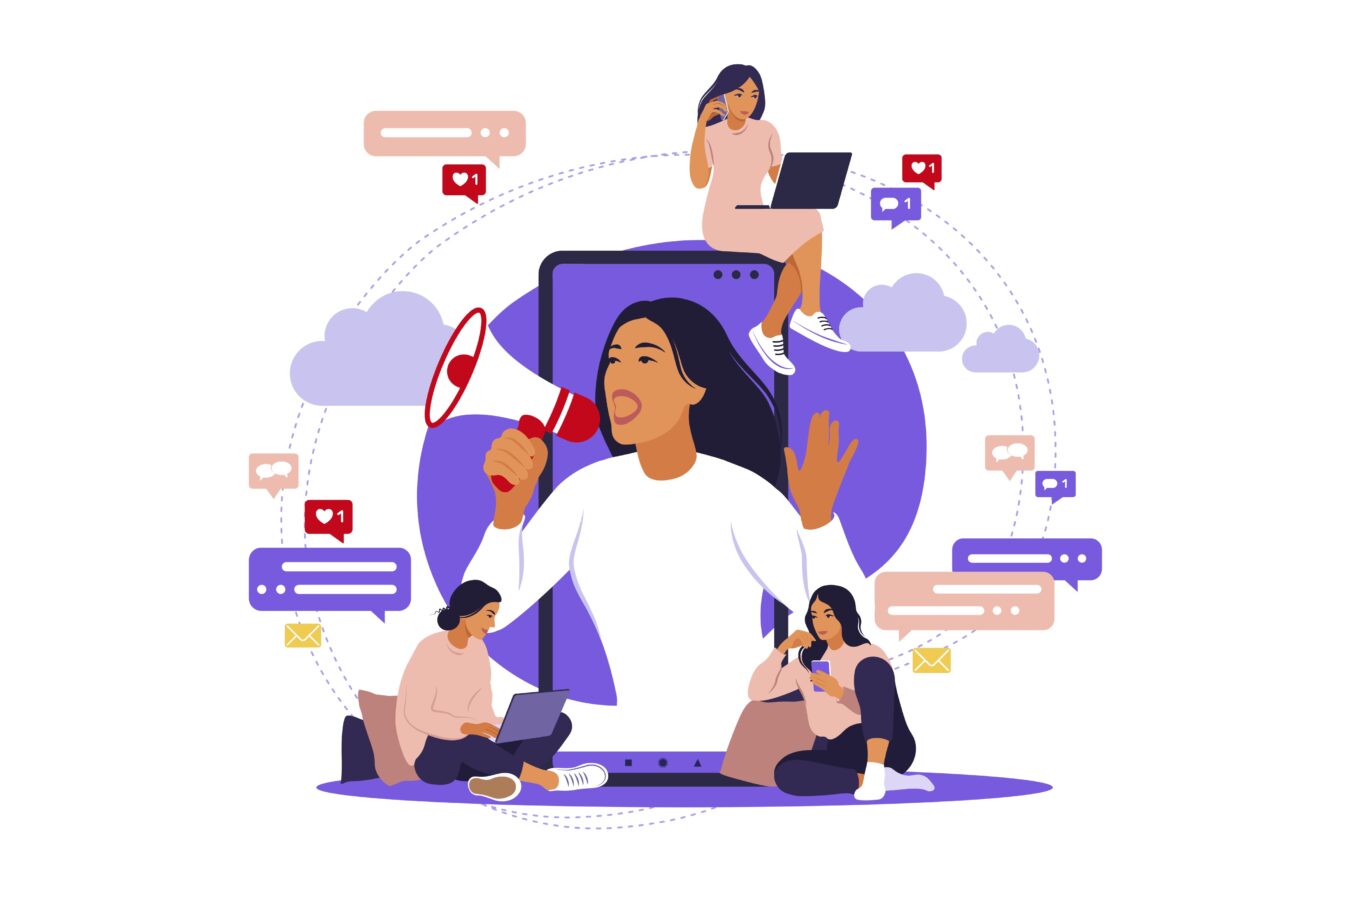 Challenges of Influencer Marketing